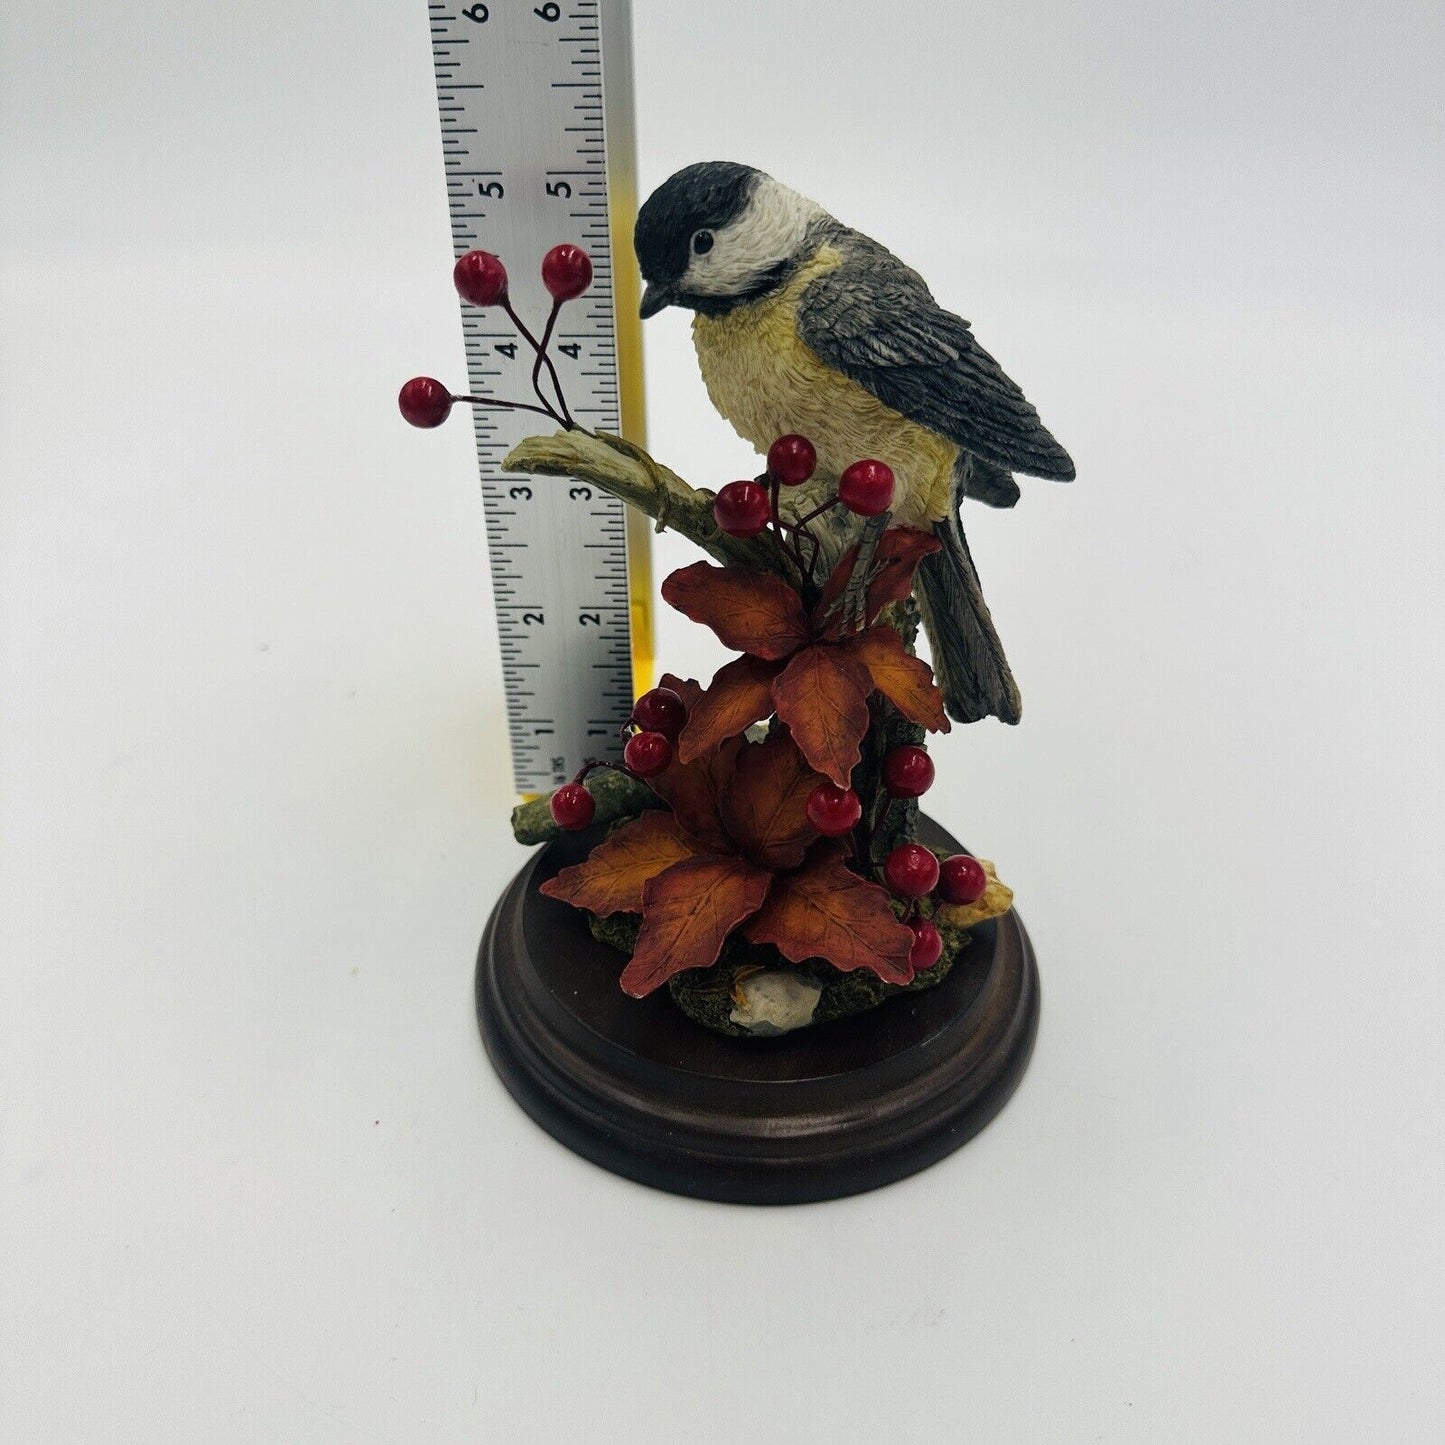 Country Artists HAND PAINTED 01700 B Capped Chickadee w Berries Figurine Signed